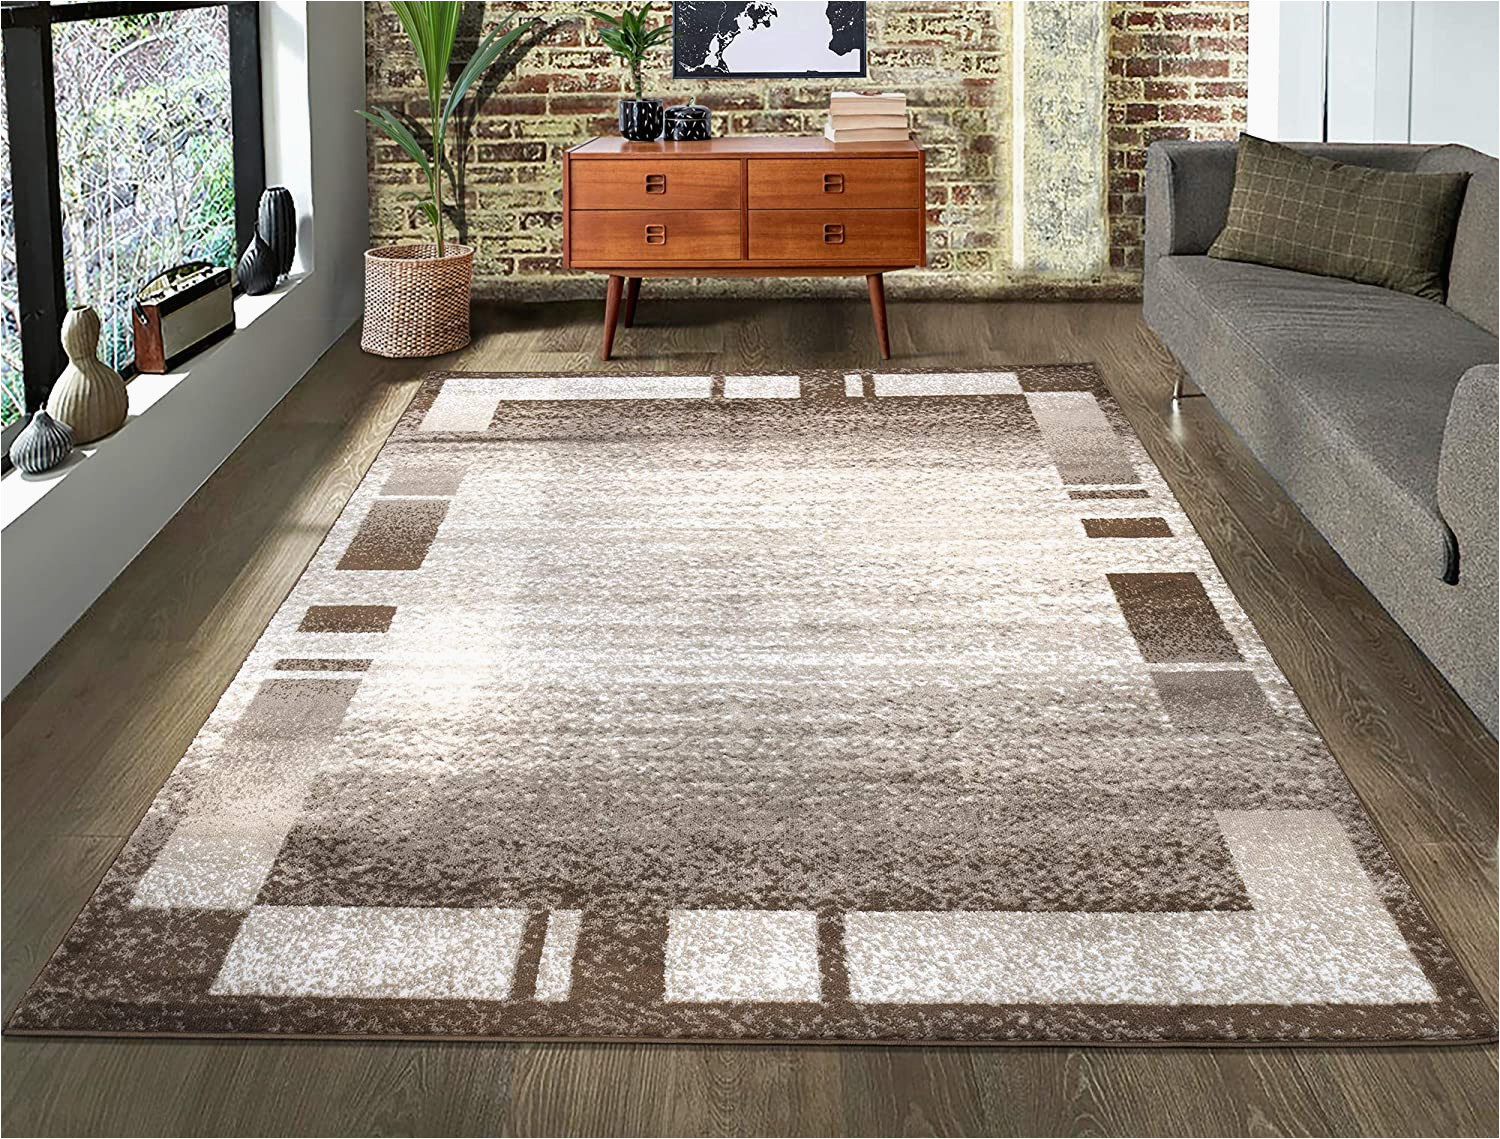 H24IWA0 a2z rug palma 9958 modern abstract beige border pattern family sitting front room area rug soft shor